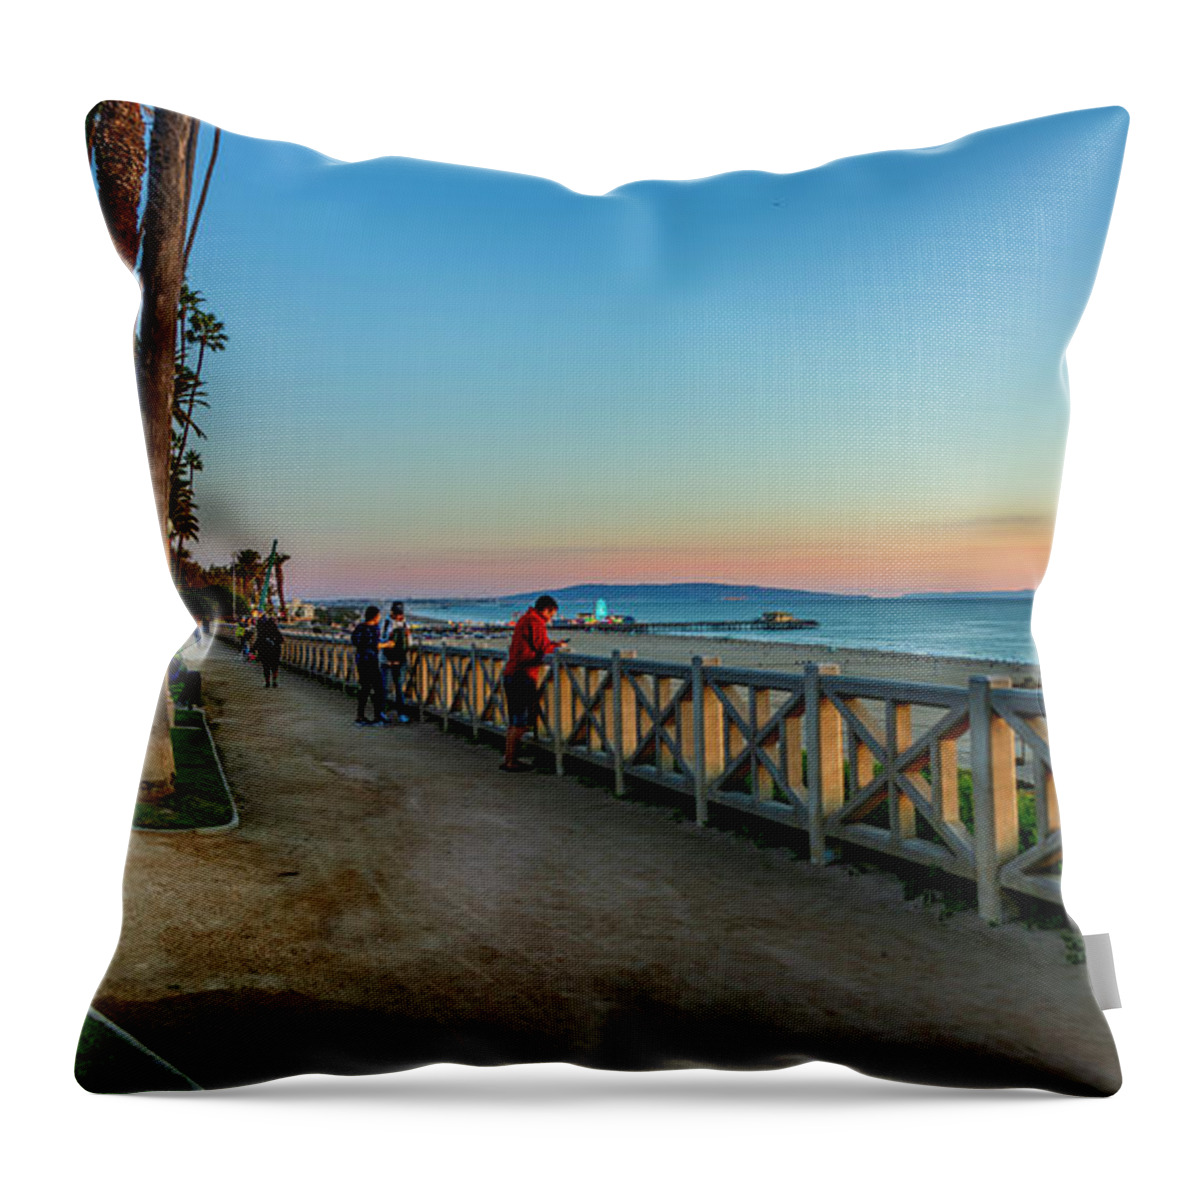 Palisades Park Throw Pillow featuring the photograph Palisades Park - Looking South by Gene Parks